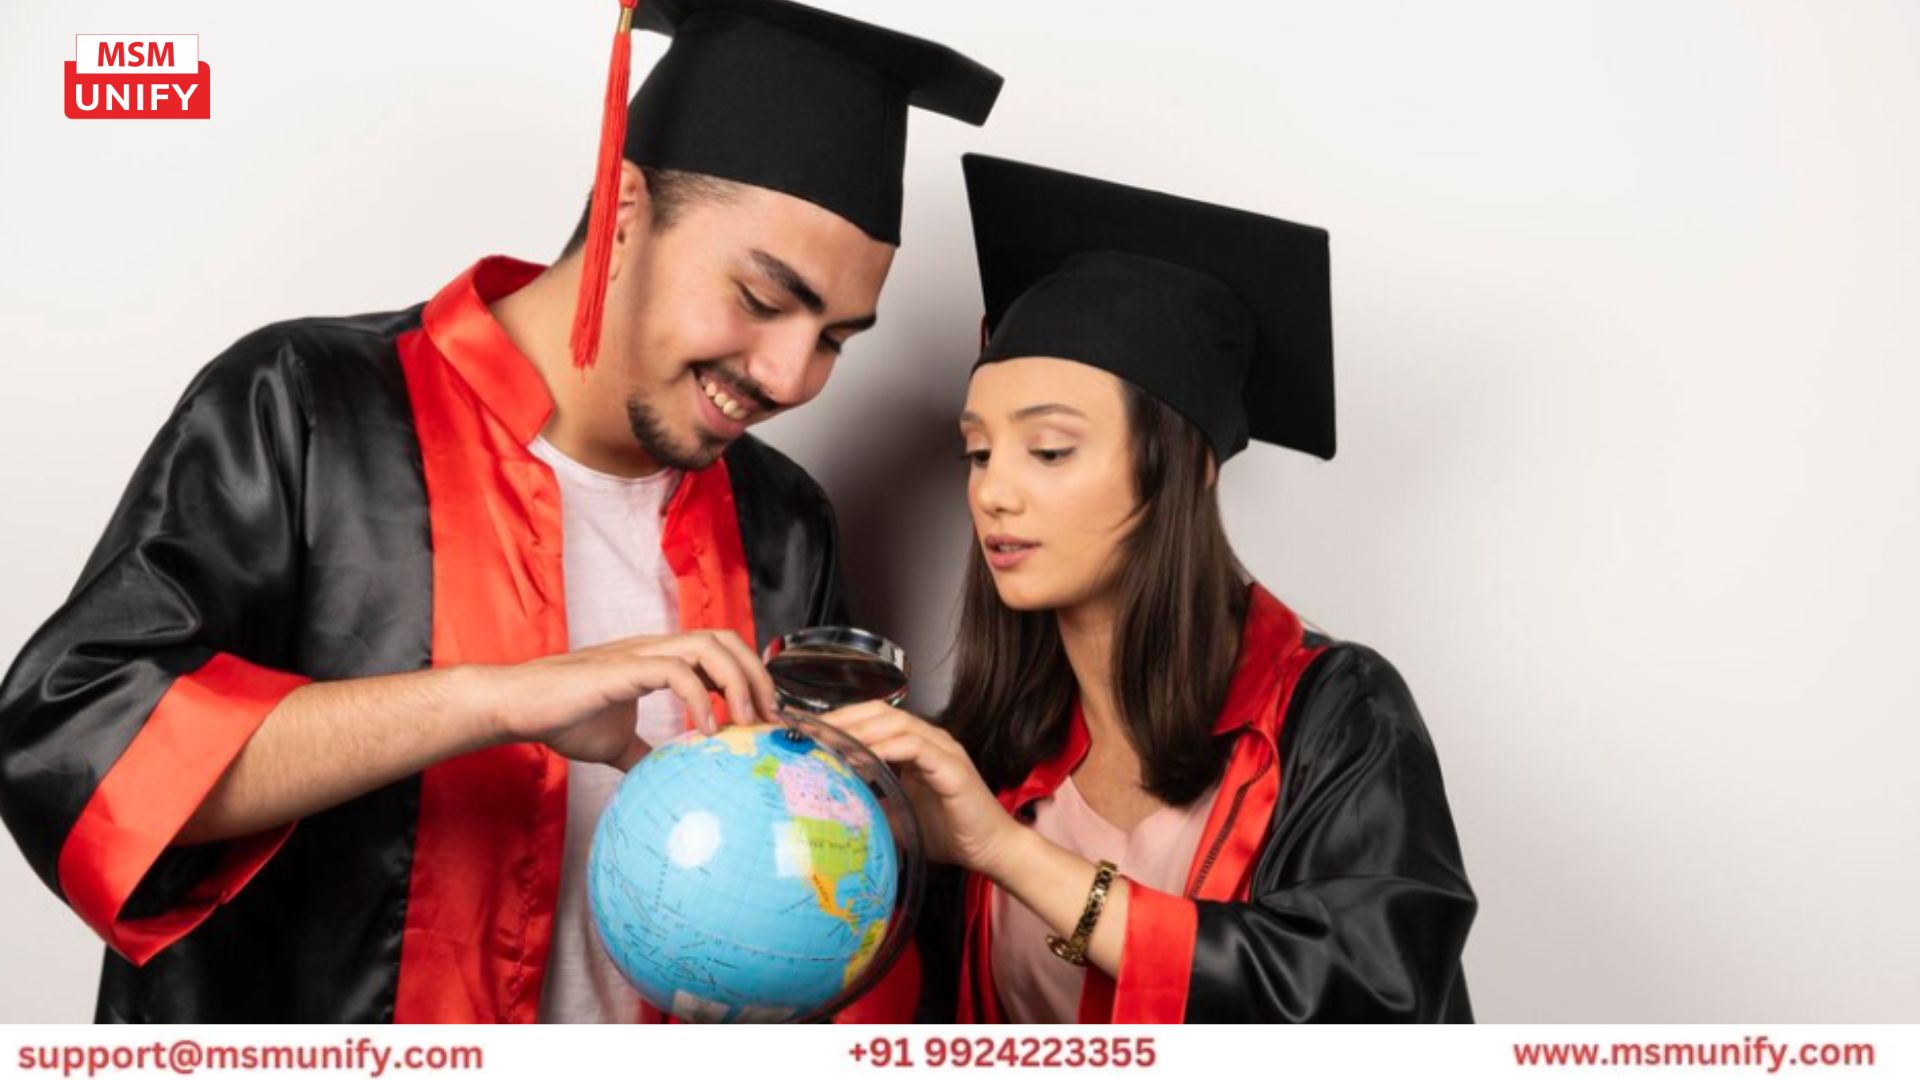 Explore the unparalleled opportunities awaiting <a href="https://www.msmunify.com/study-in-canada/">study in Canada for Indian Students</a>. Discover top universities, scholarships, visa requirements, and invaluable insights for a successful academic journey abroad.

